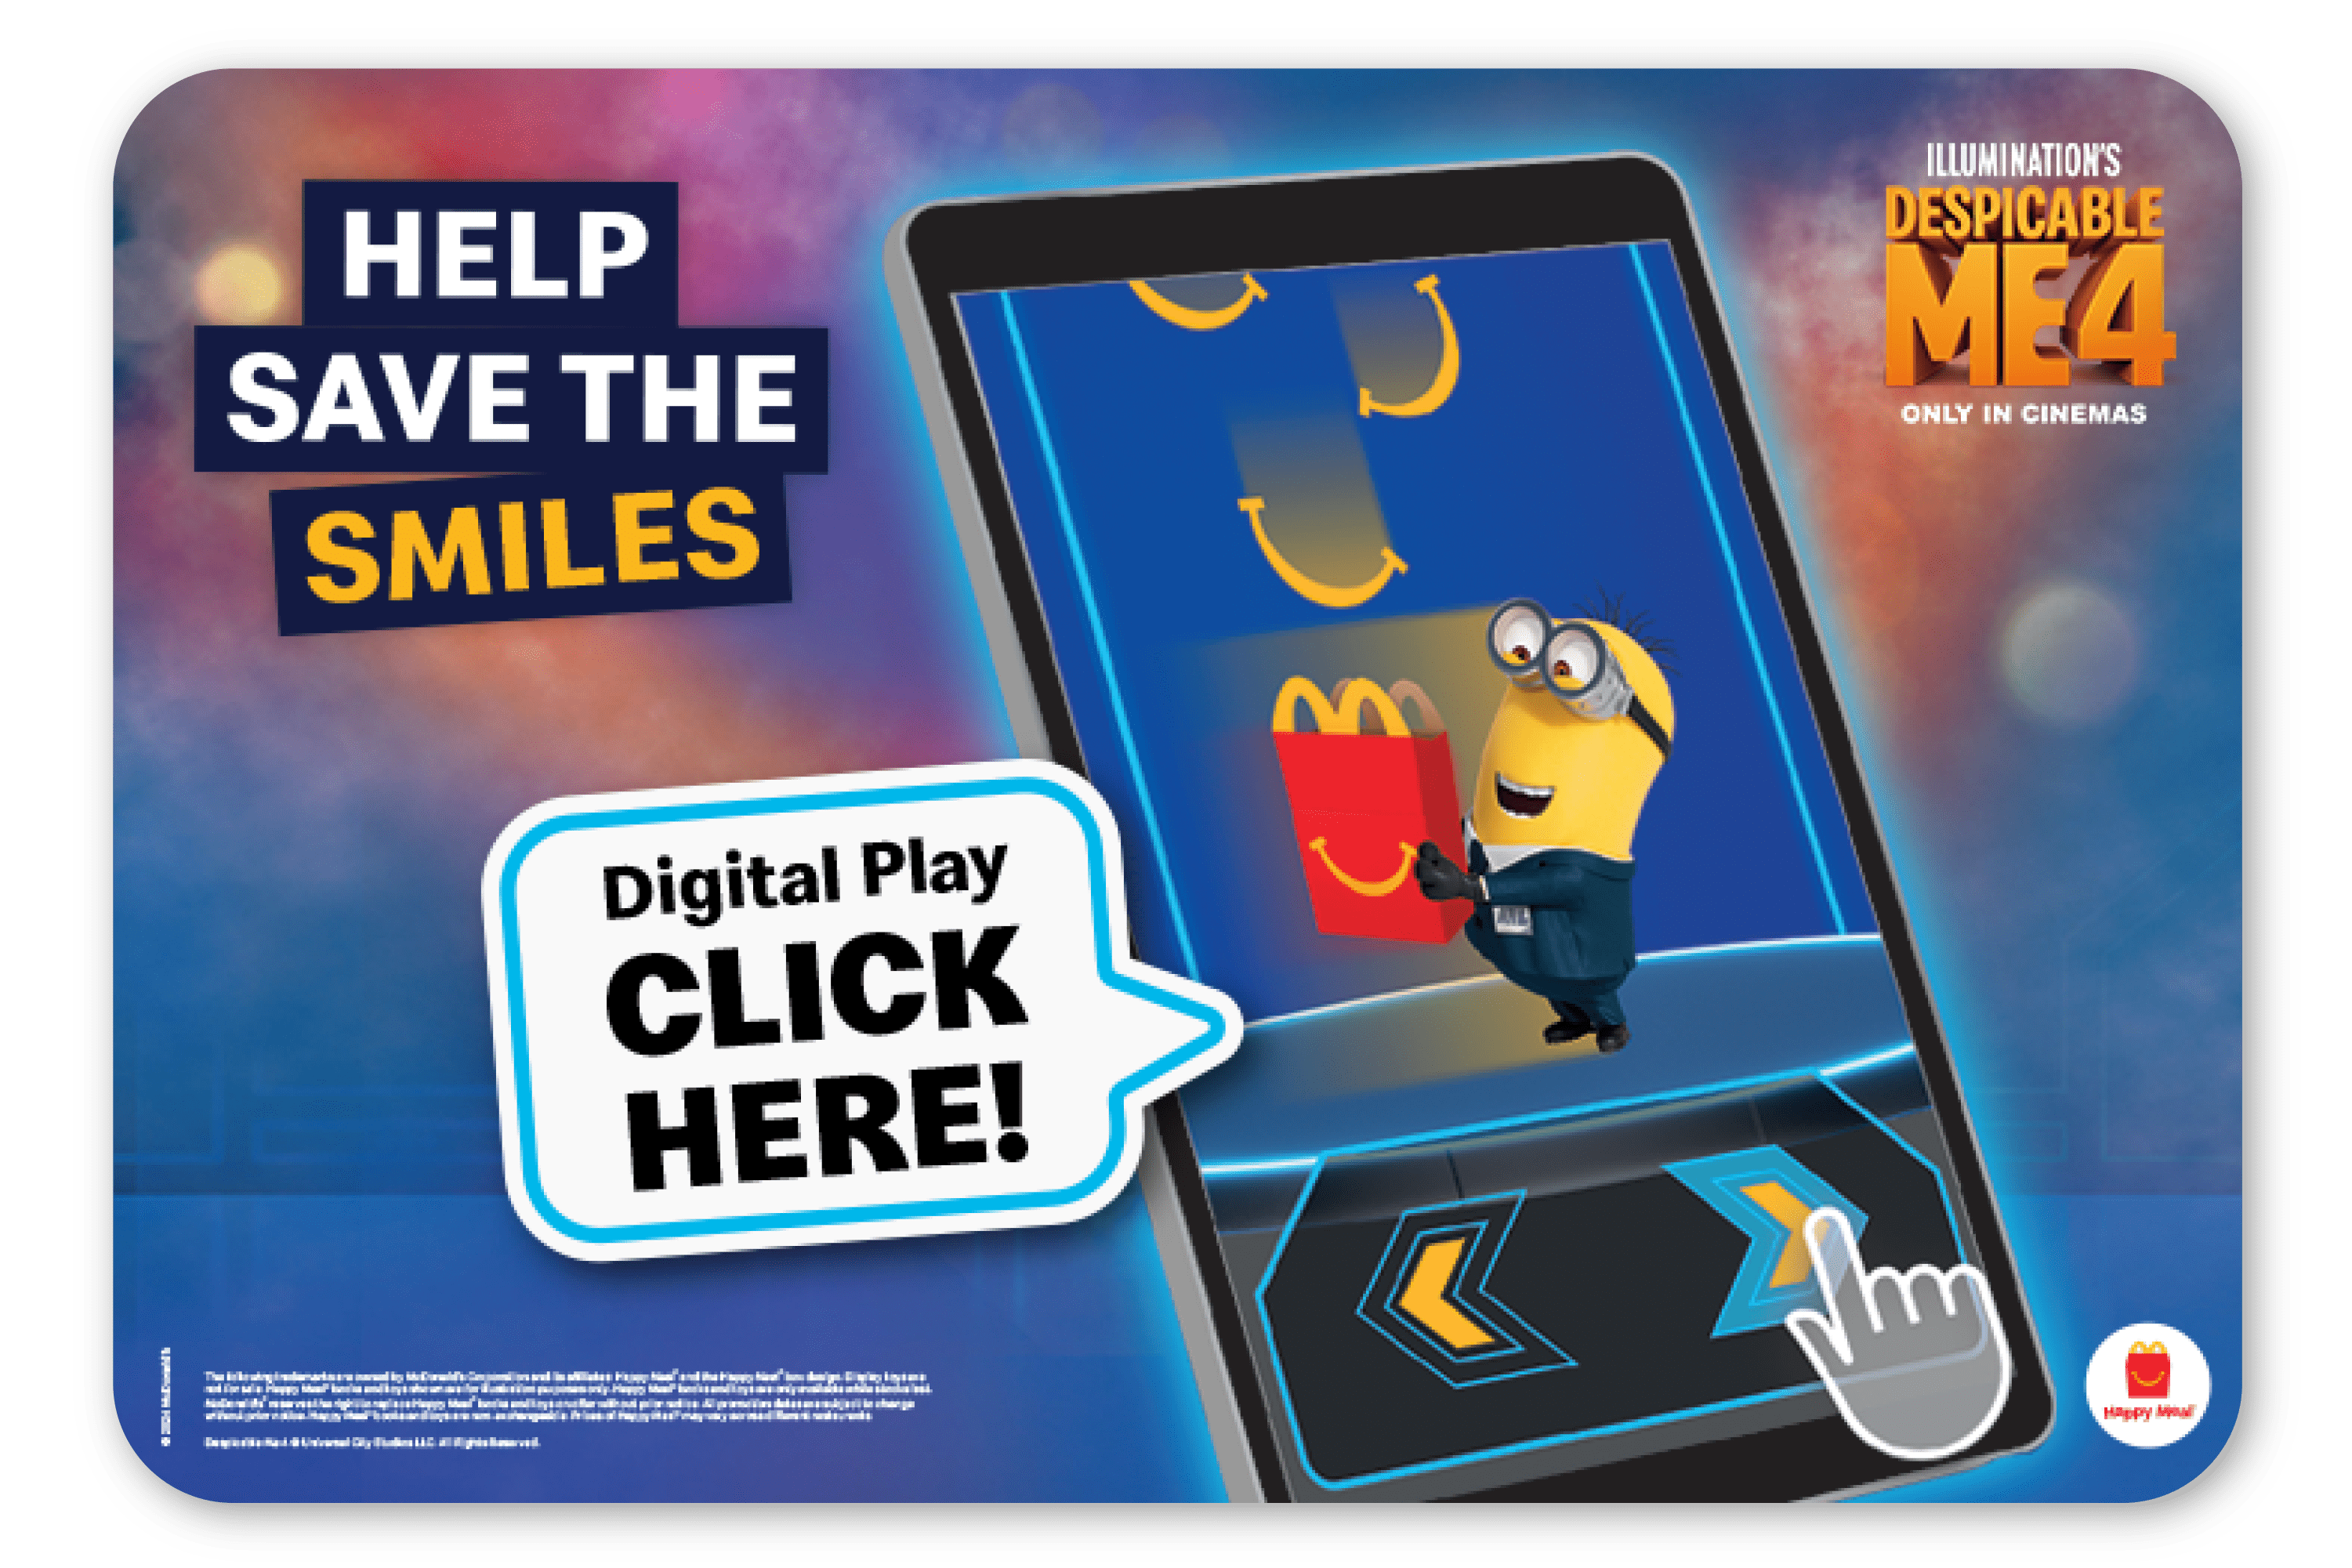 Enjoy Despicable Me 4 Digital Experience with every Happy Meal® Toy!